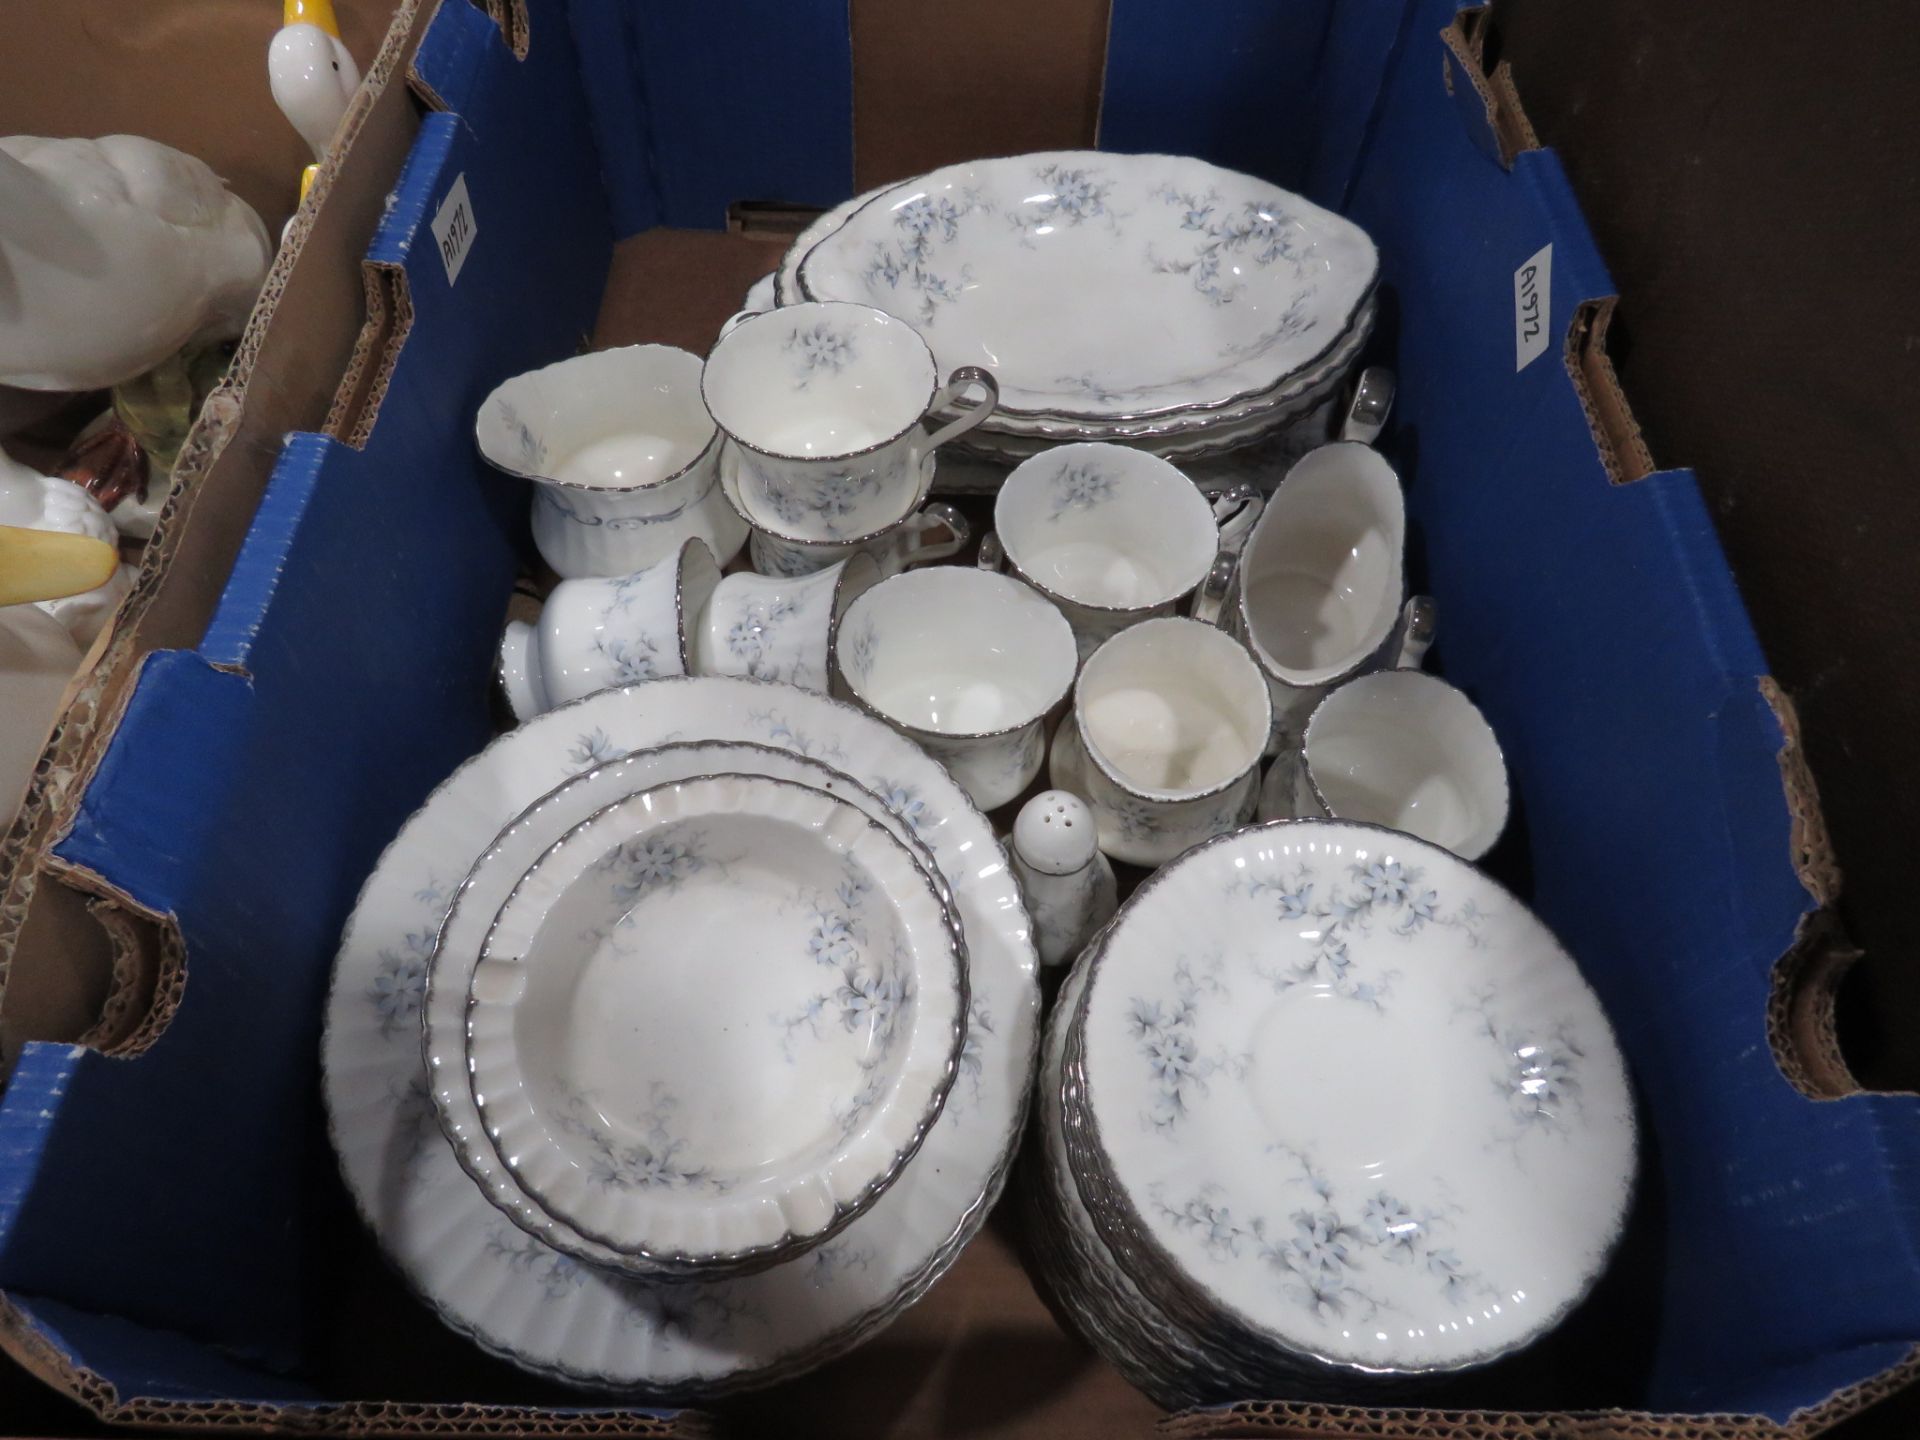 Box containing a quantity of Paragon brides choice patterned crockery